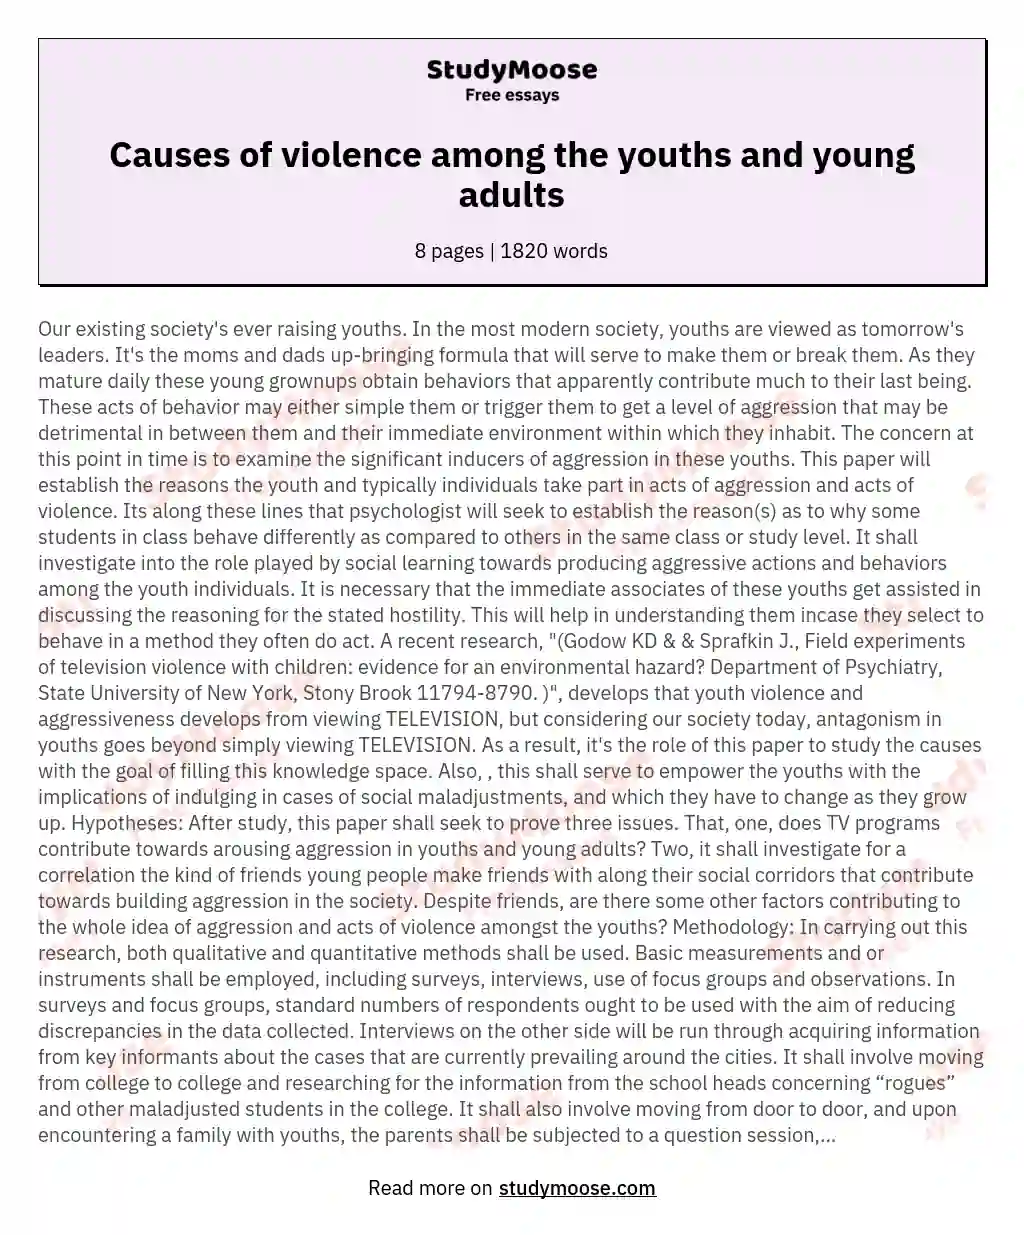 Causes of violence among the youths and young adults